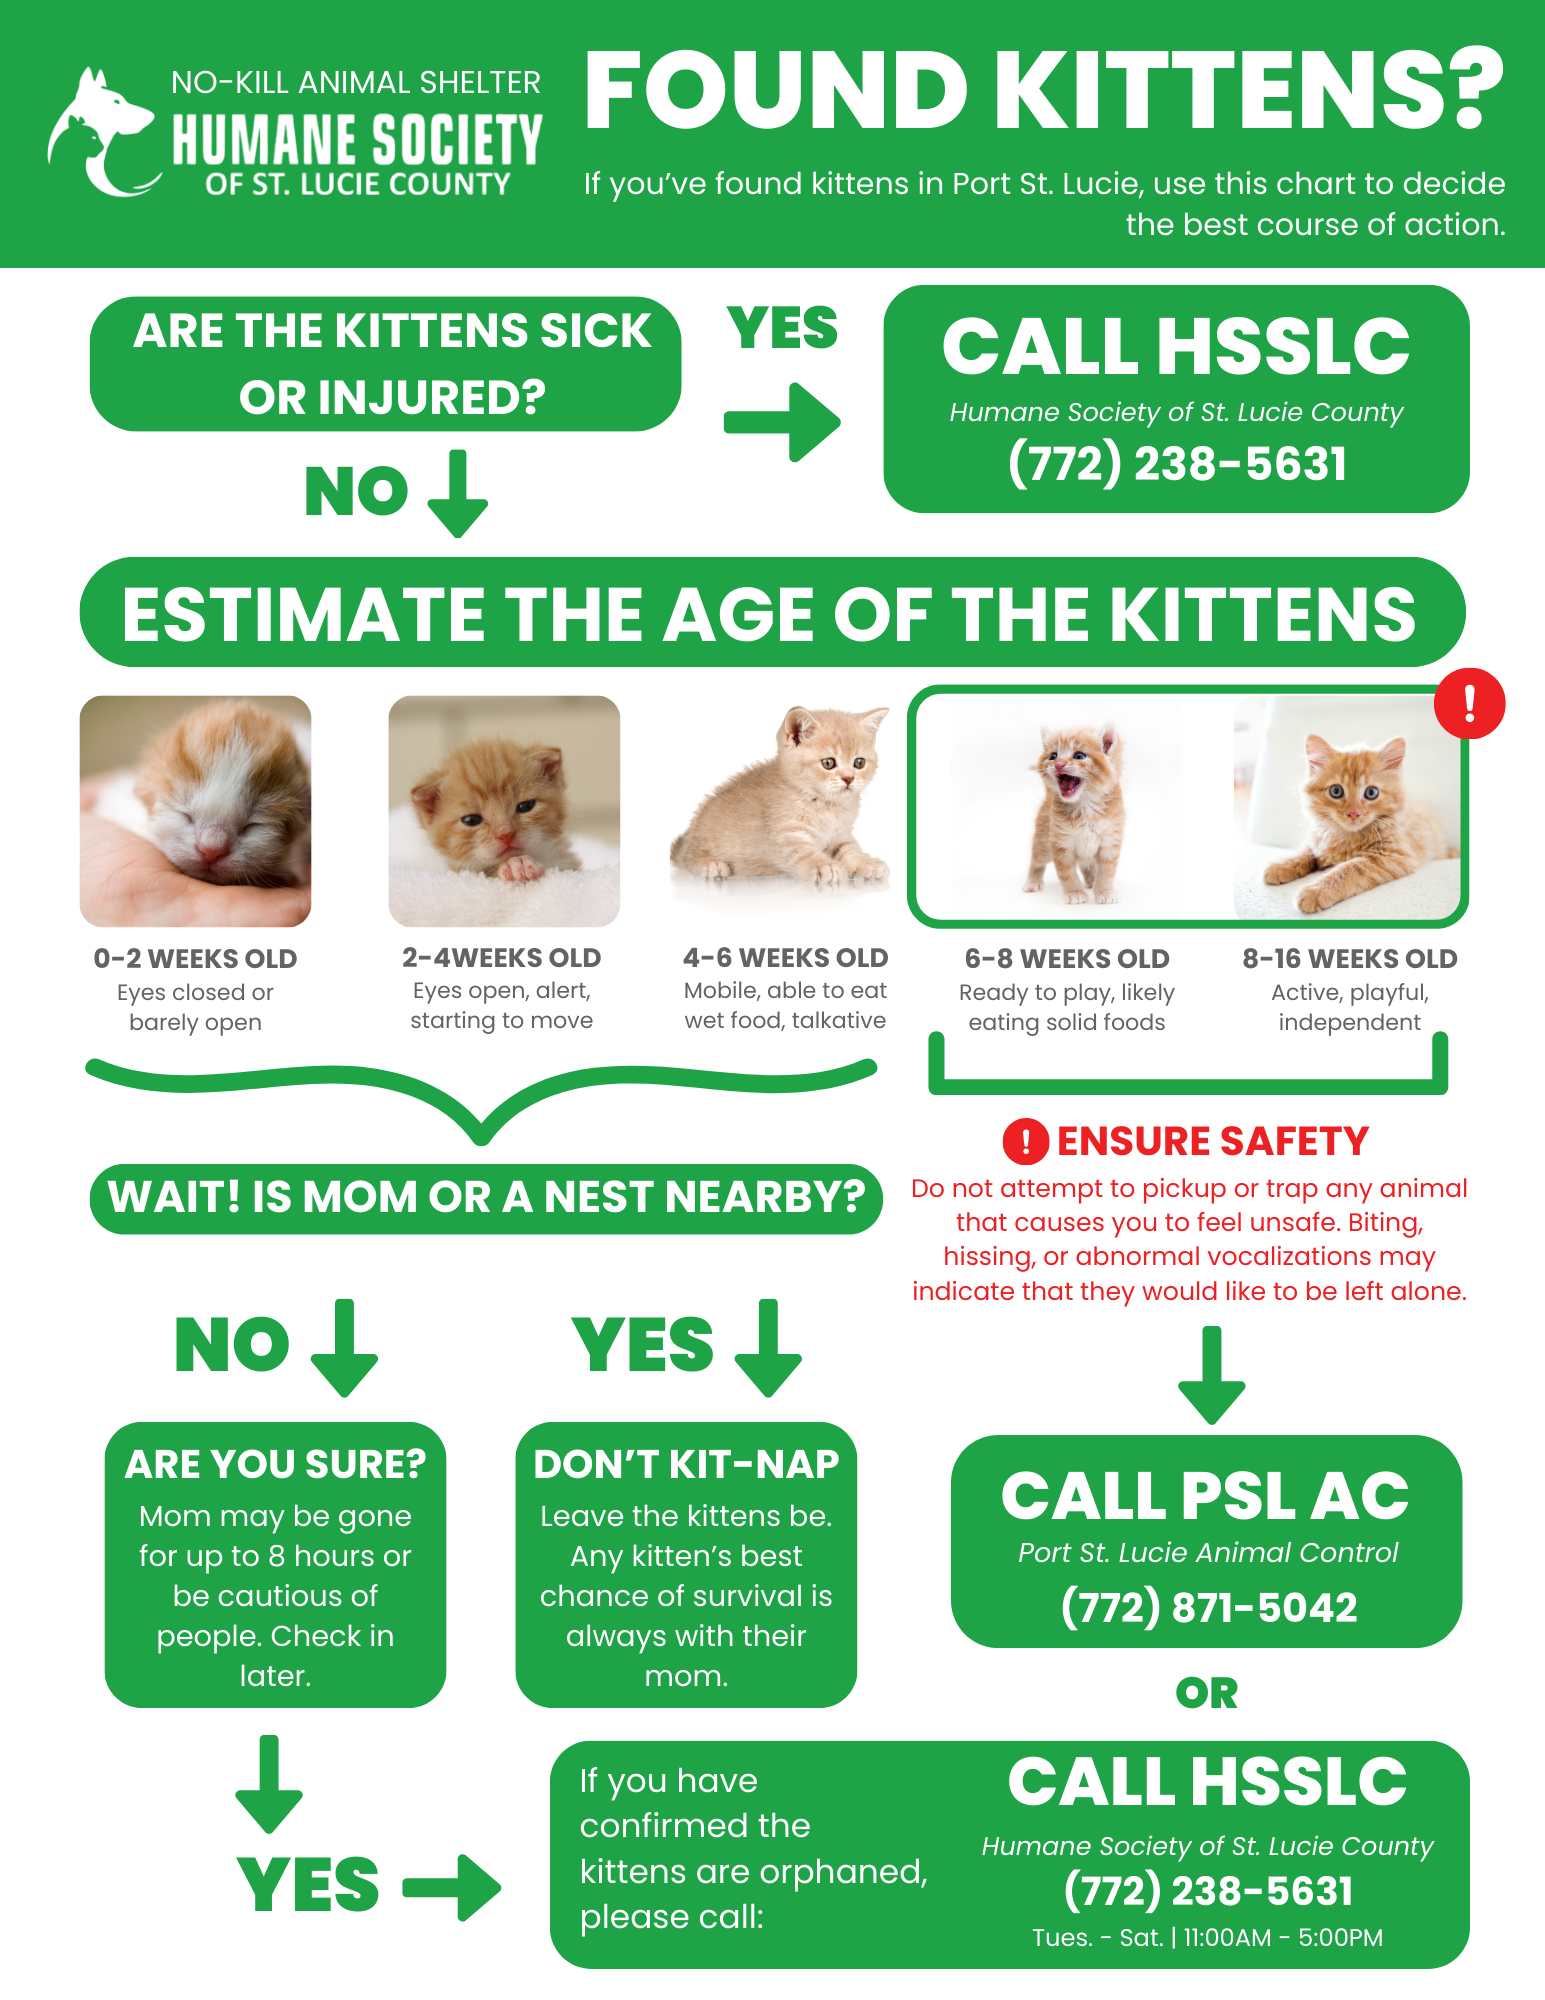 What to Do If You Find Kittens